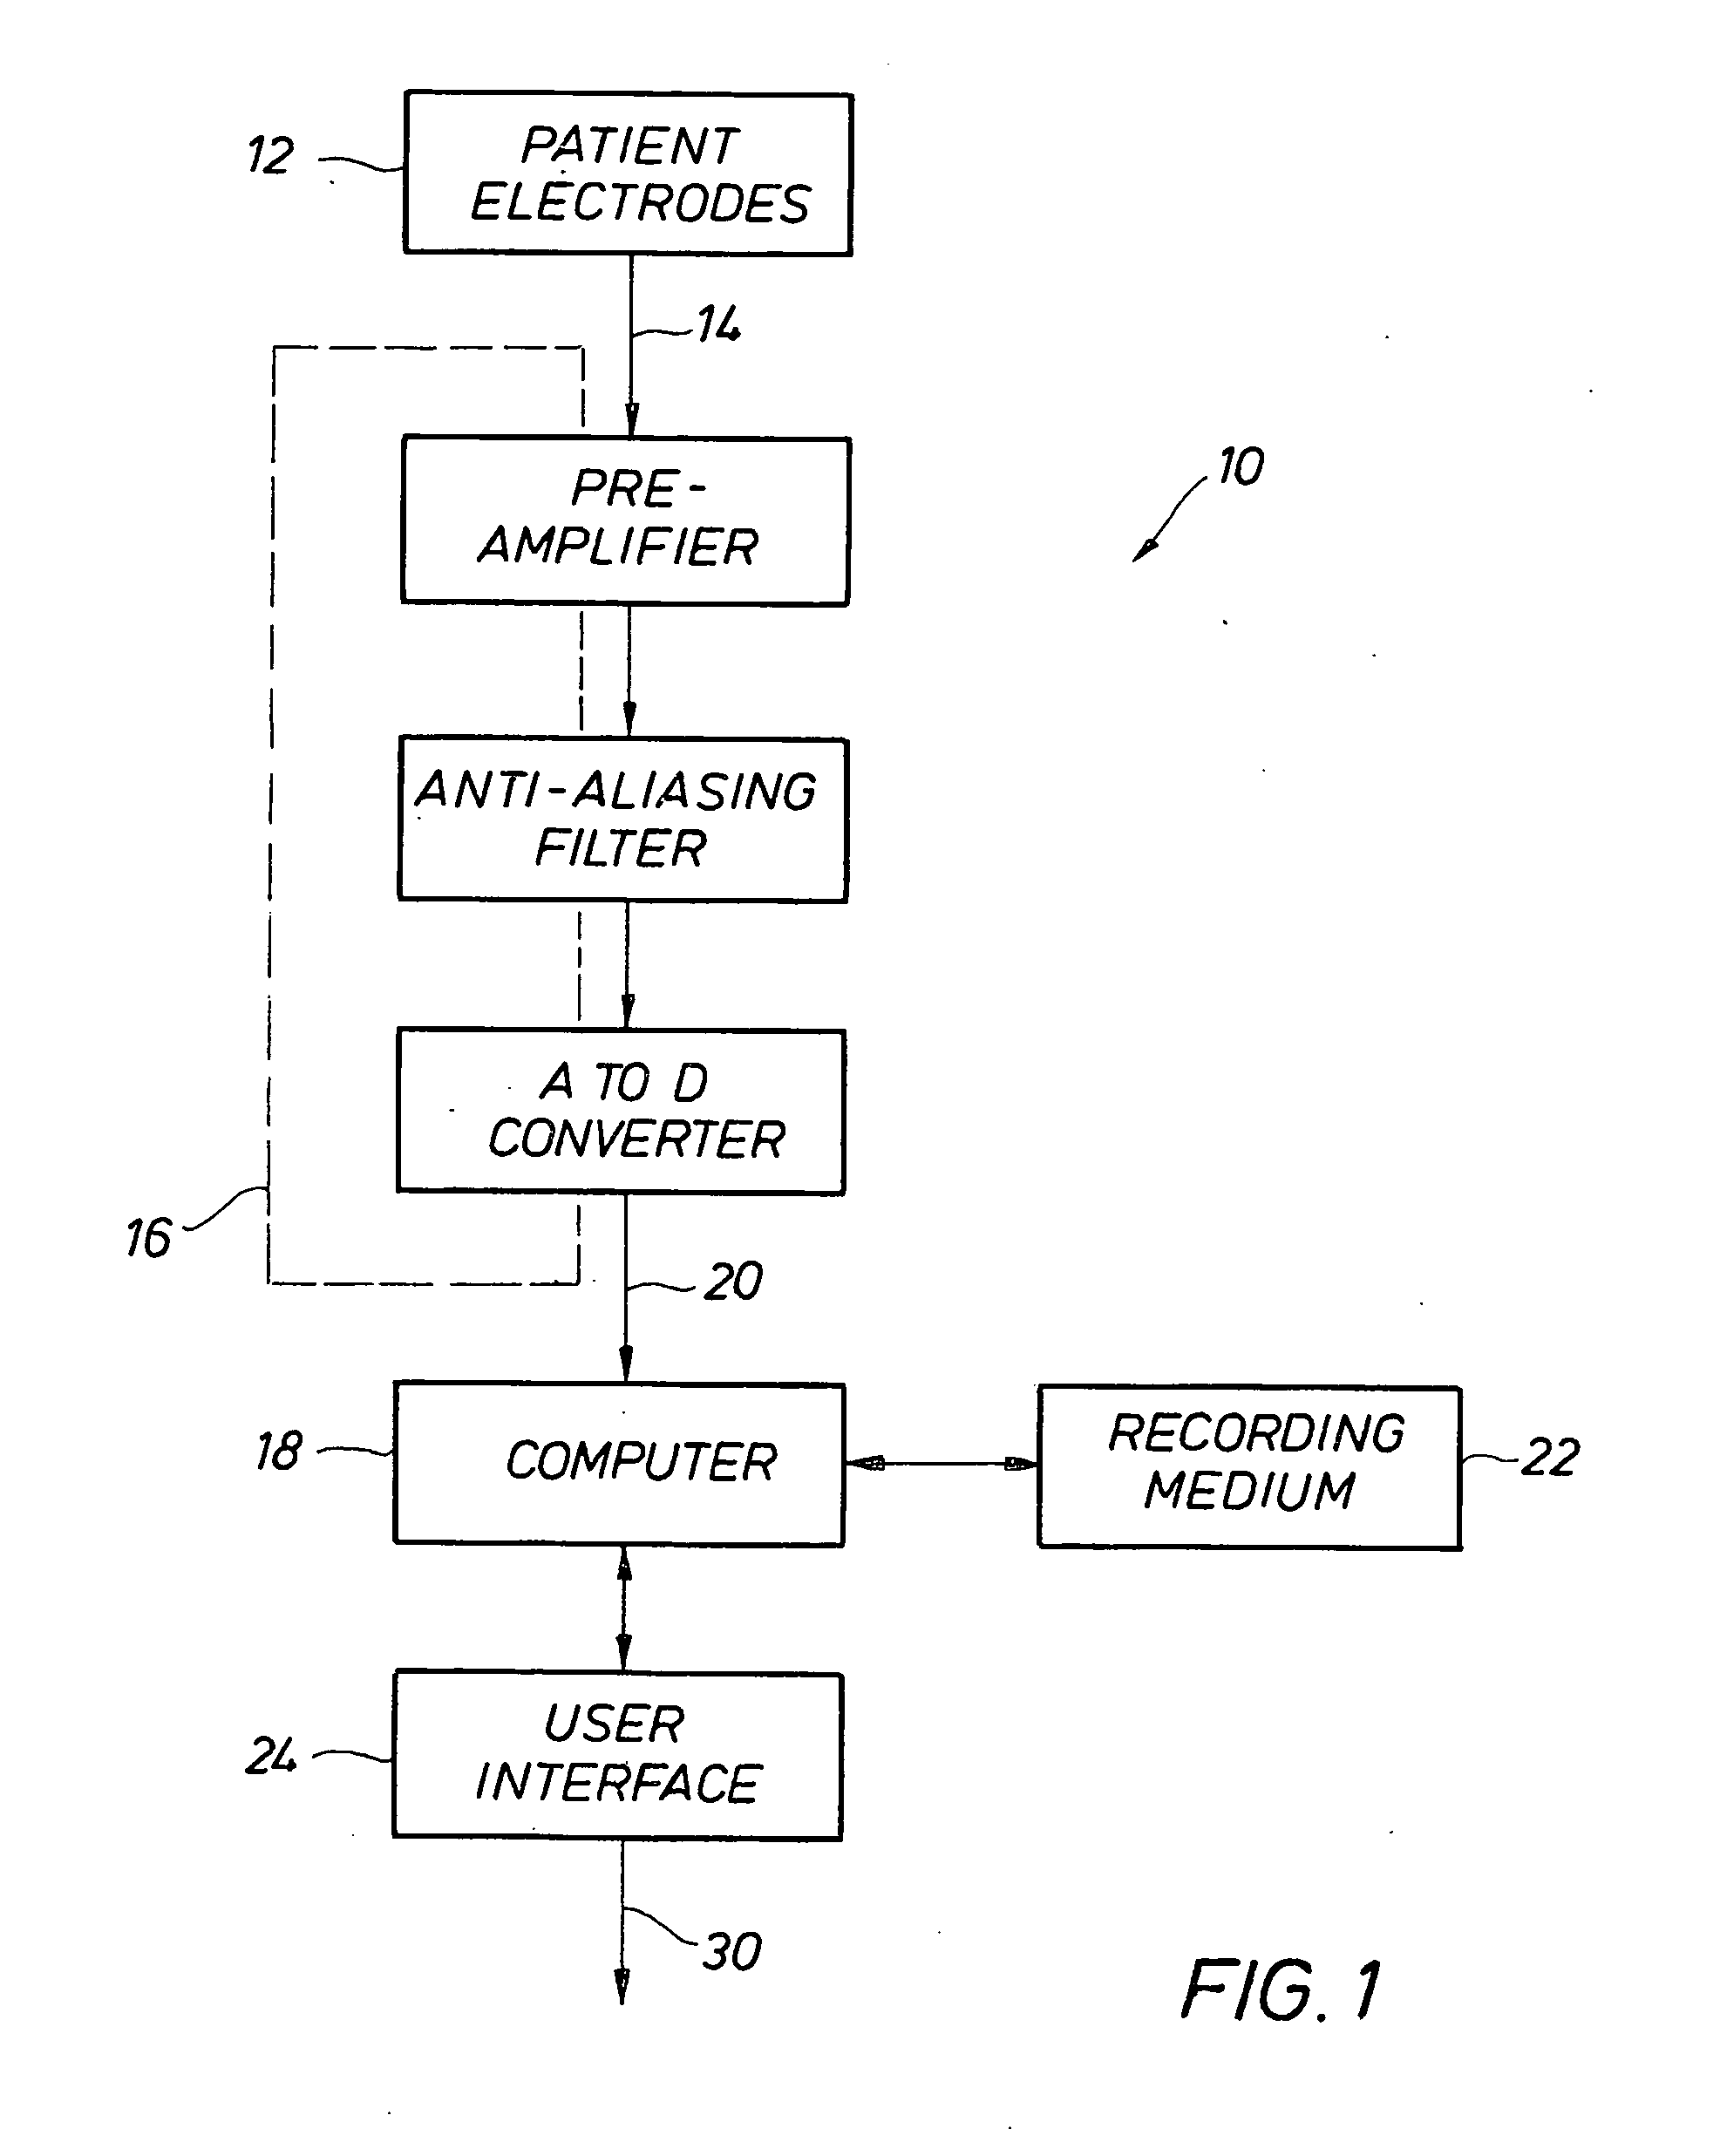 Diagnostic and predictive system and methodology using multiple parameter electrocardiography superscores